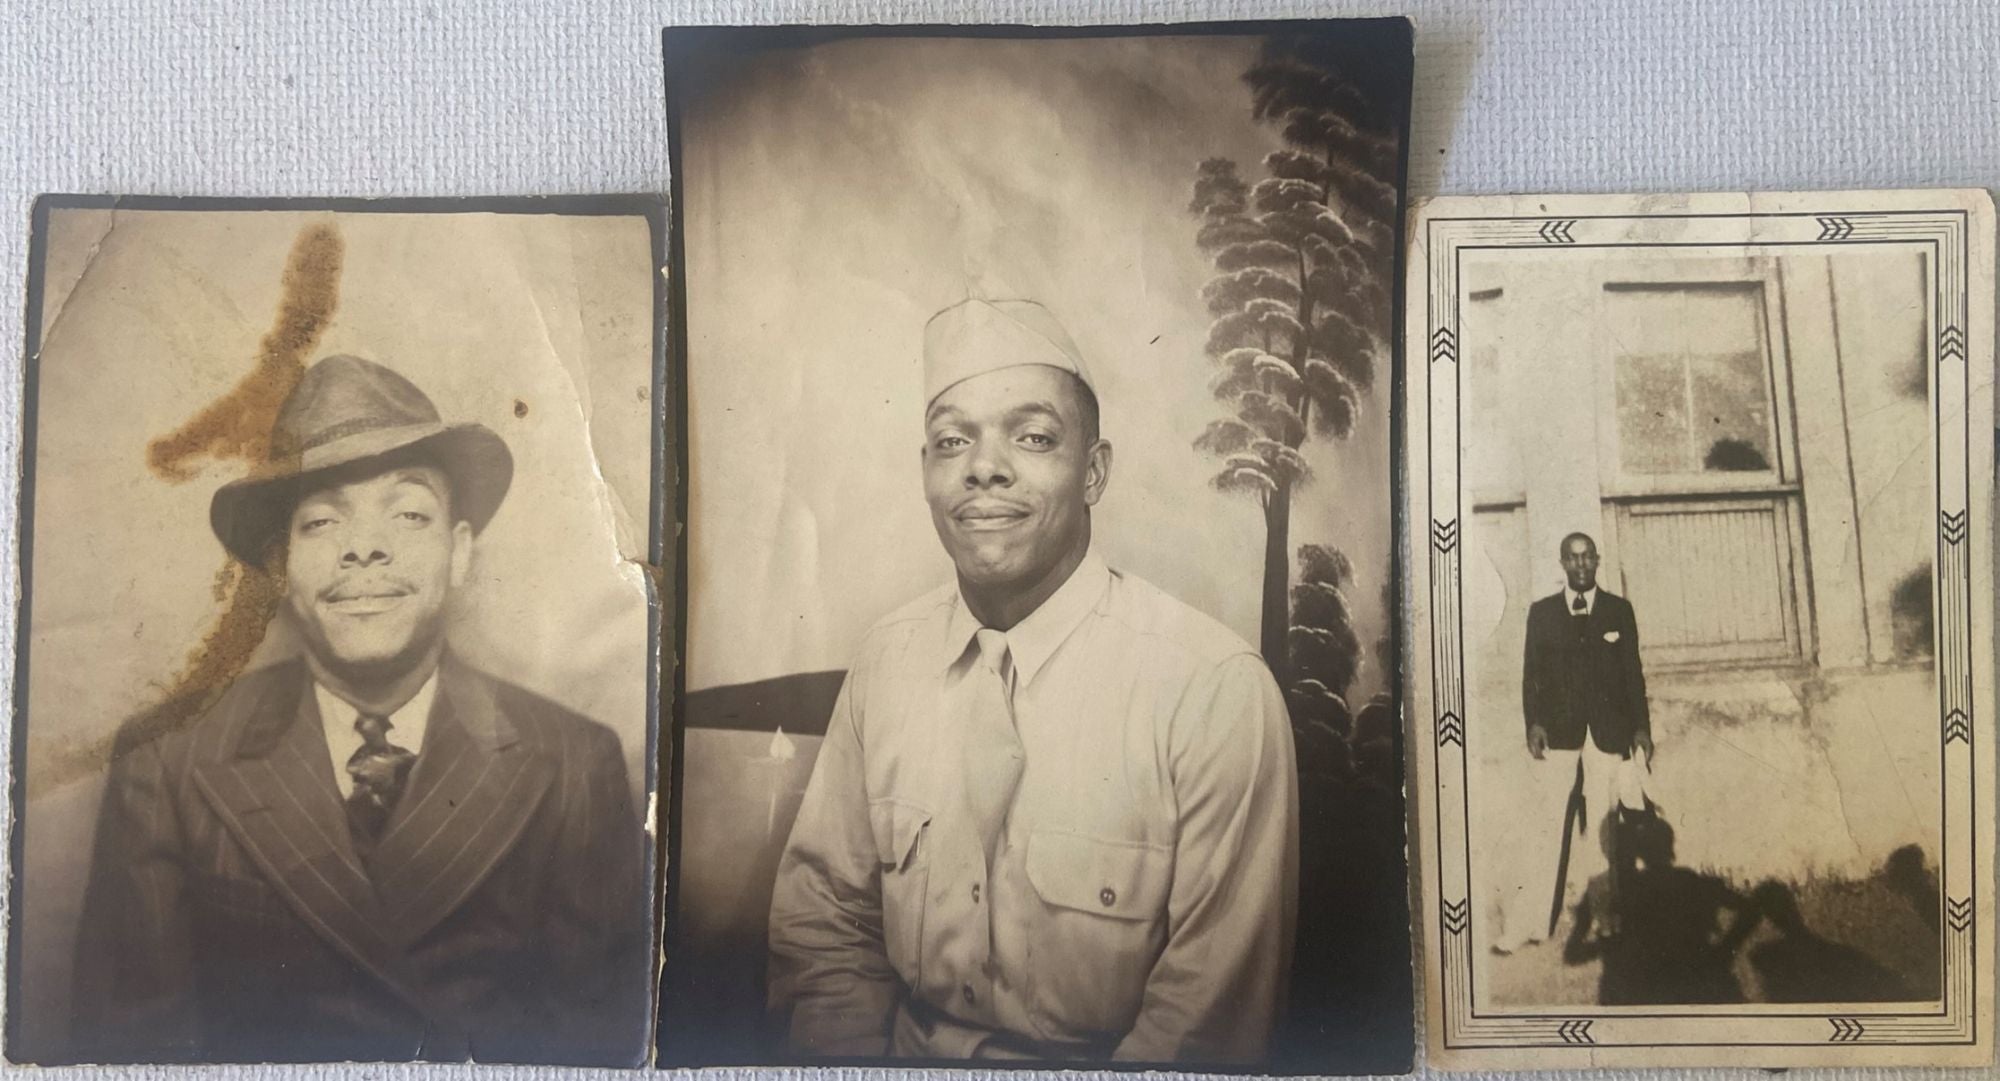 Photo Album of African American Extended Family Life C. 1930-1960 by Family  life African American on Max Rambod